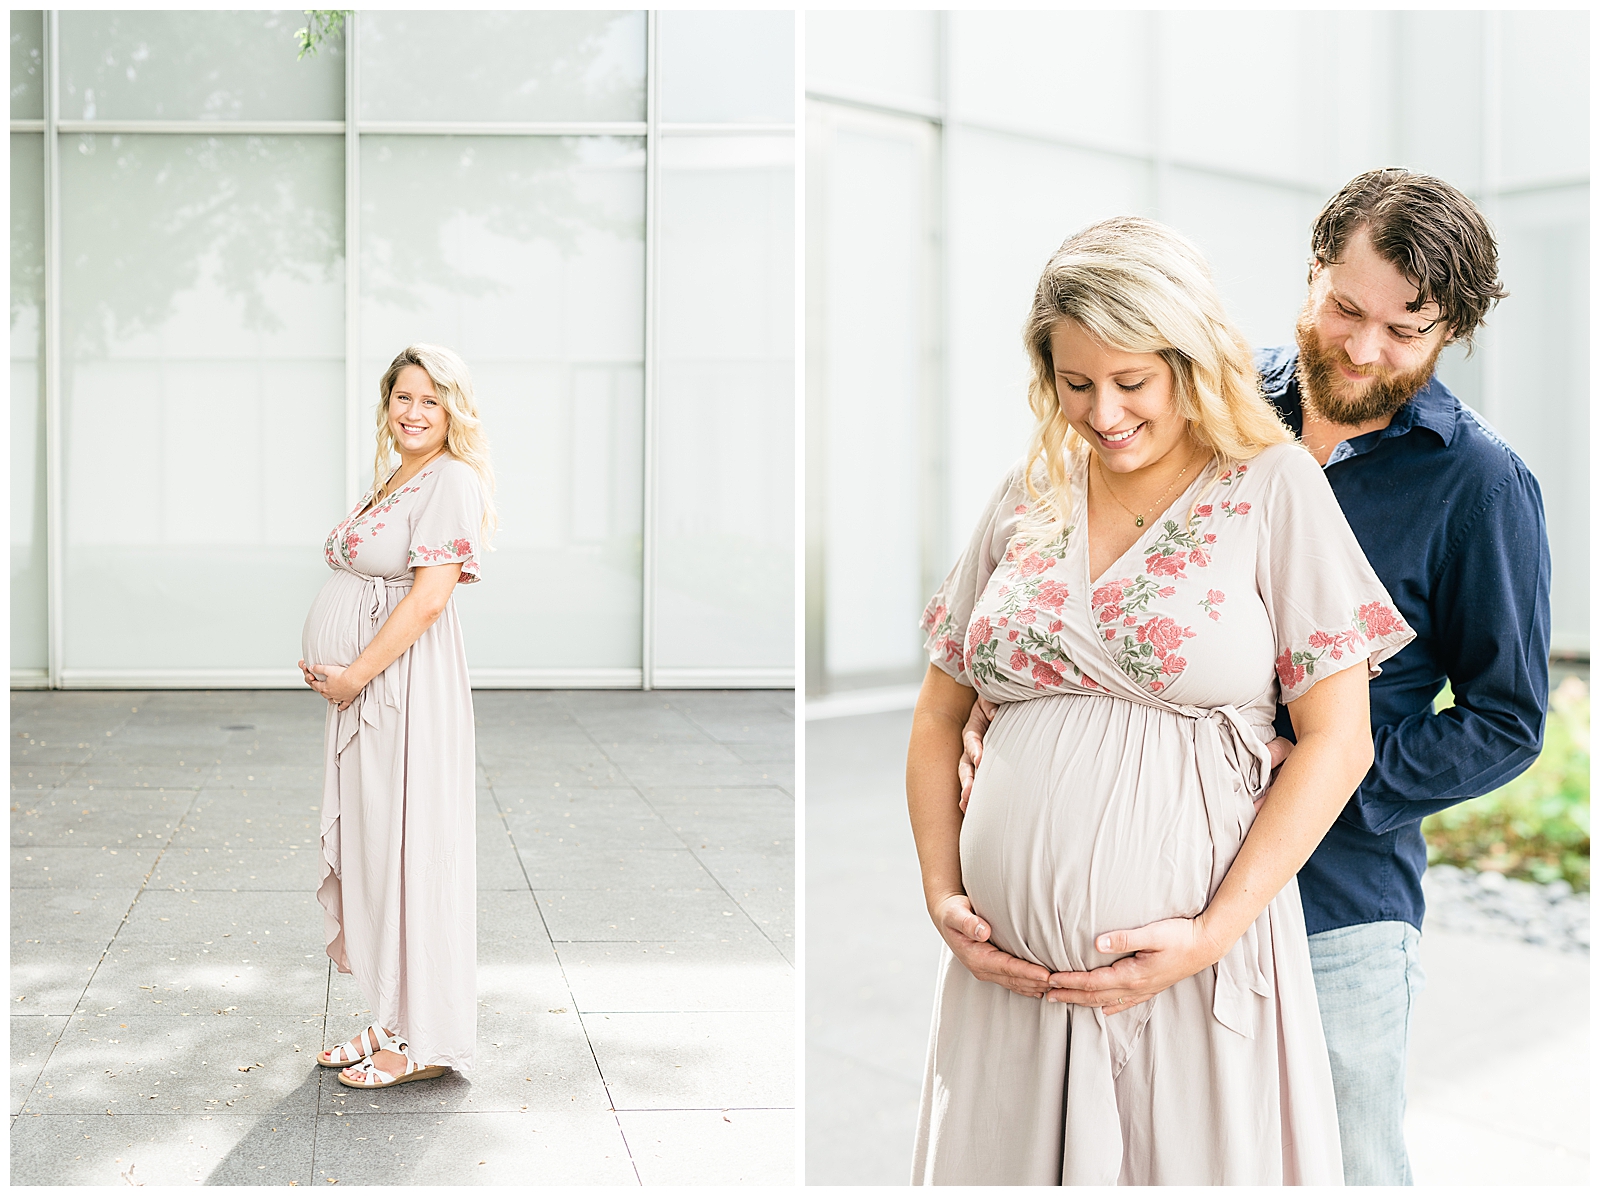 Beautiful Family Maternity Photos with Toddler